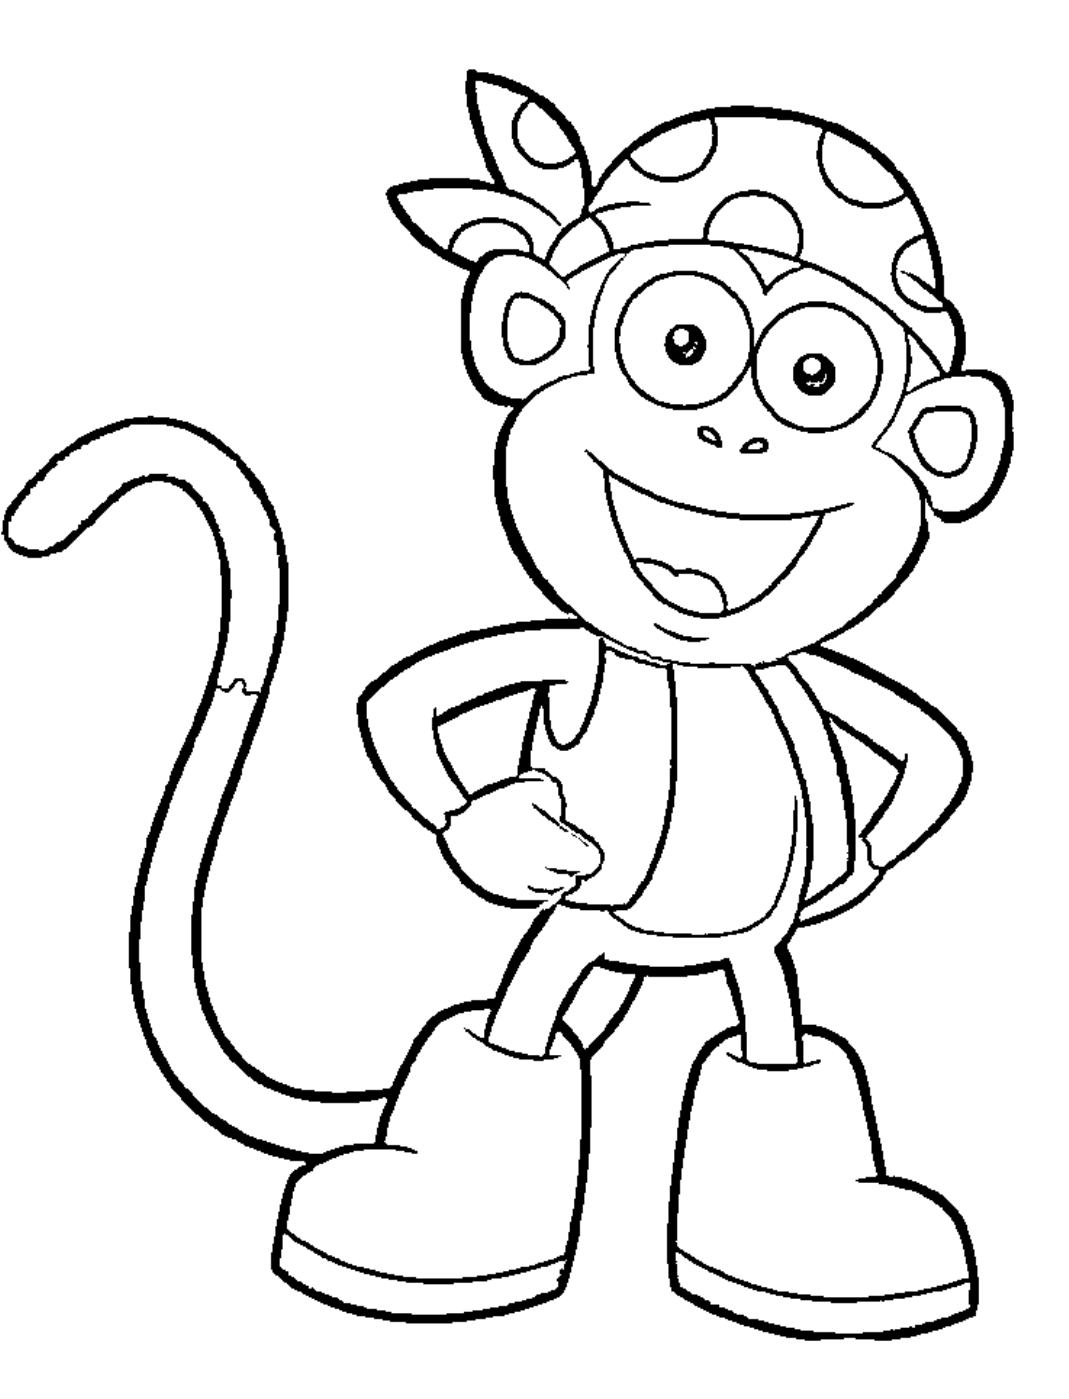 Free Printable Cartoon Characters Coloring Pages, Download Free